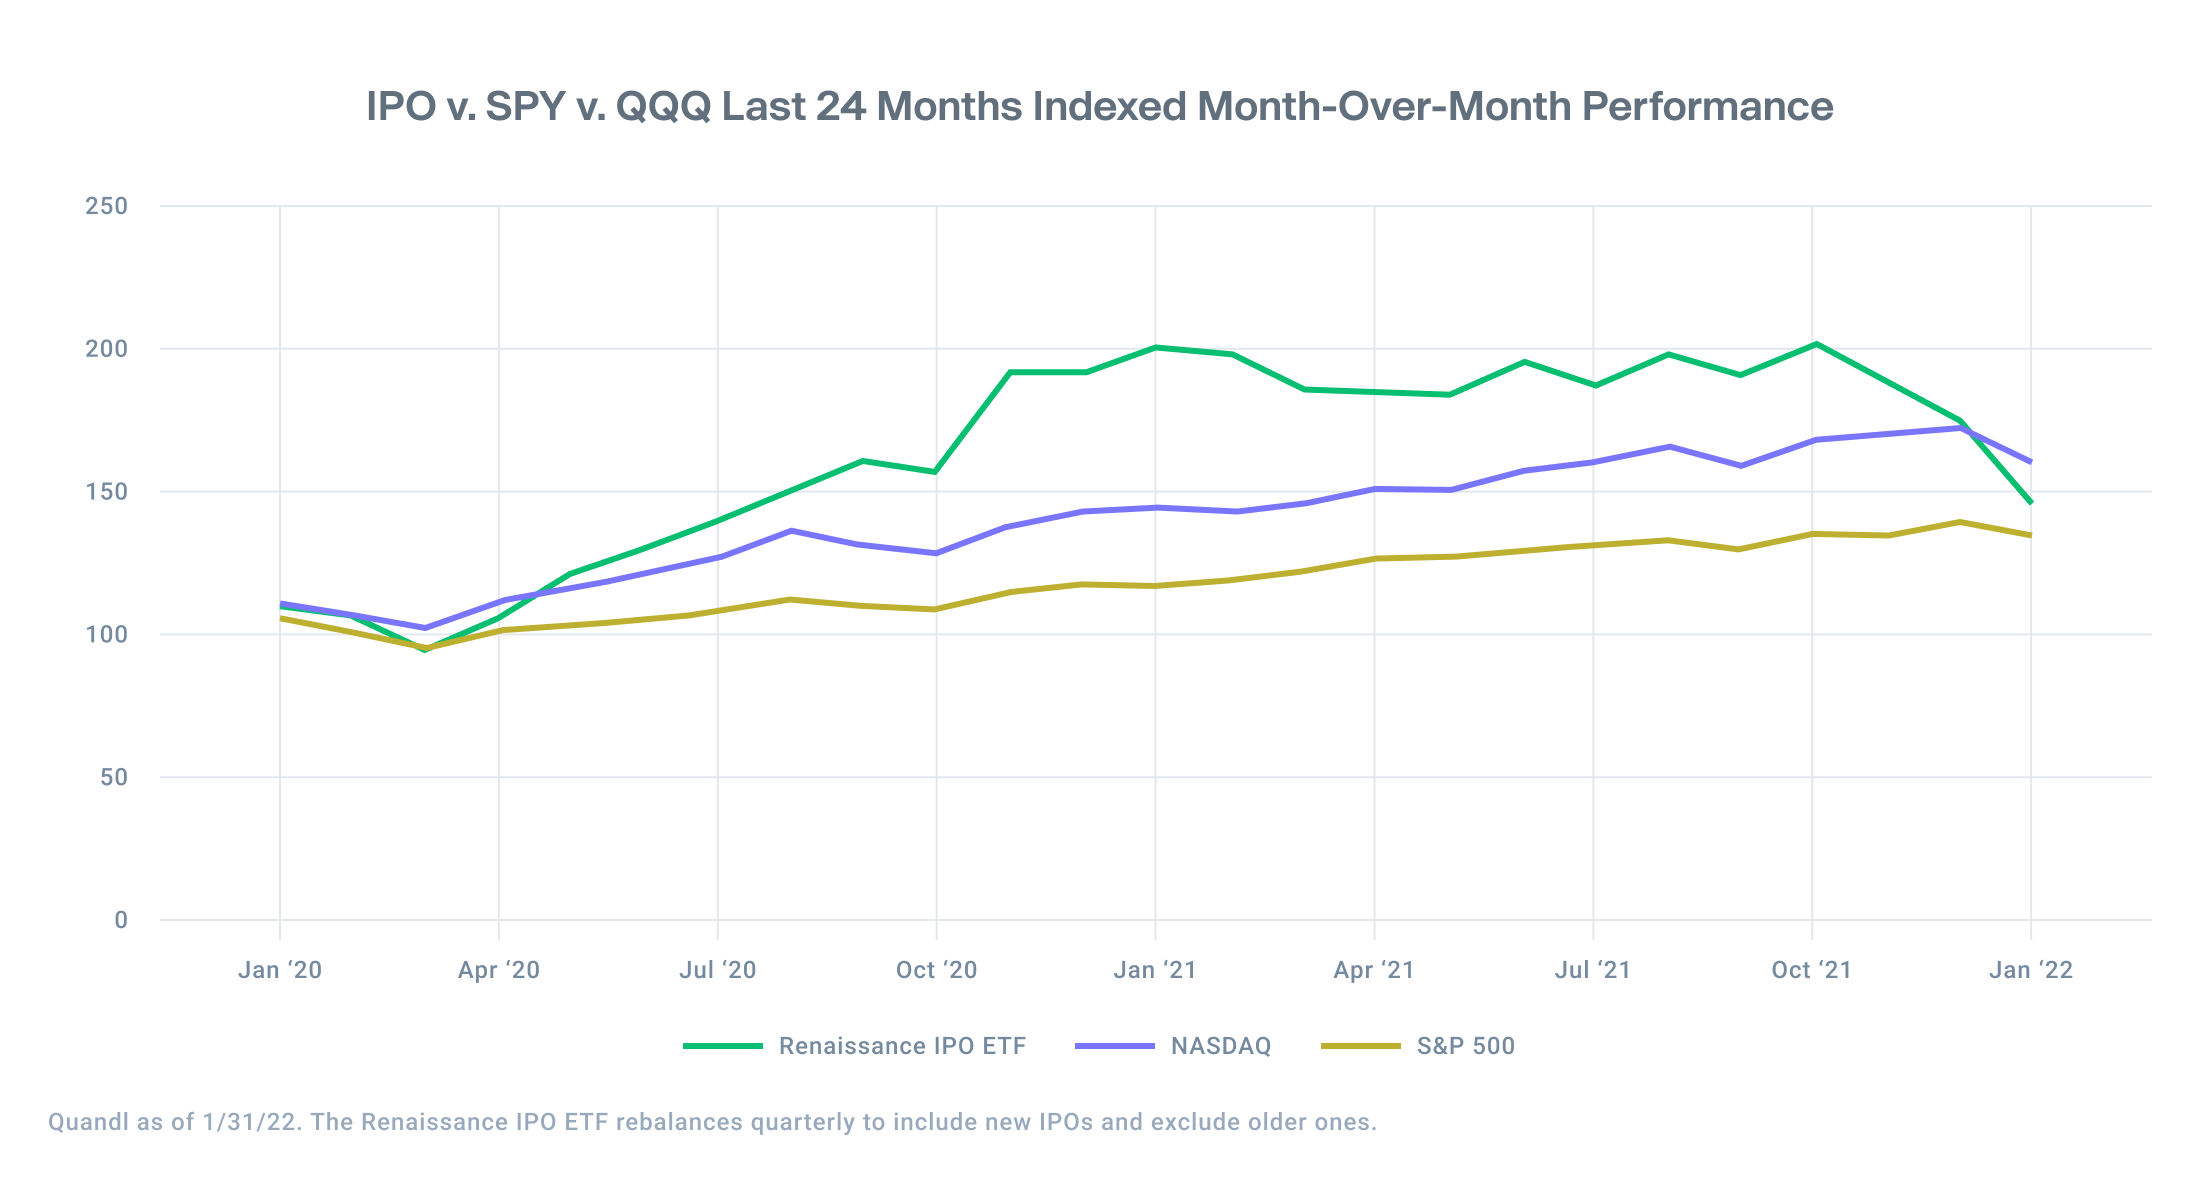 IPO v. SPY v. QQQ Last 24 Months Indexed Month-Over-Month Performance